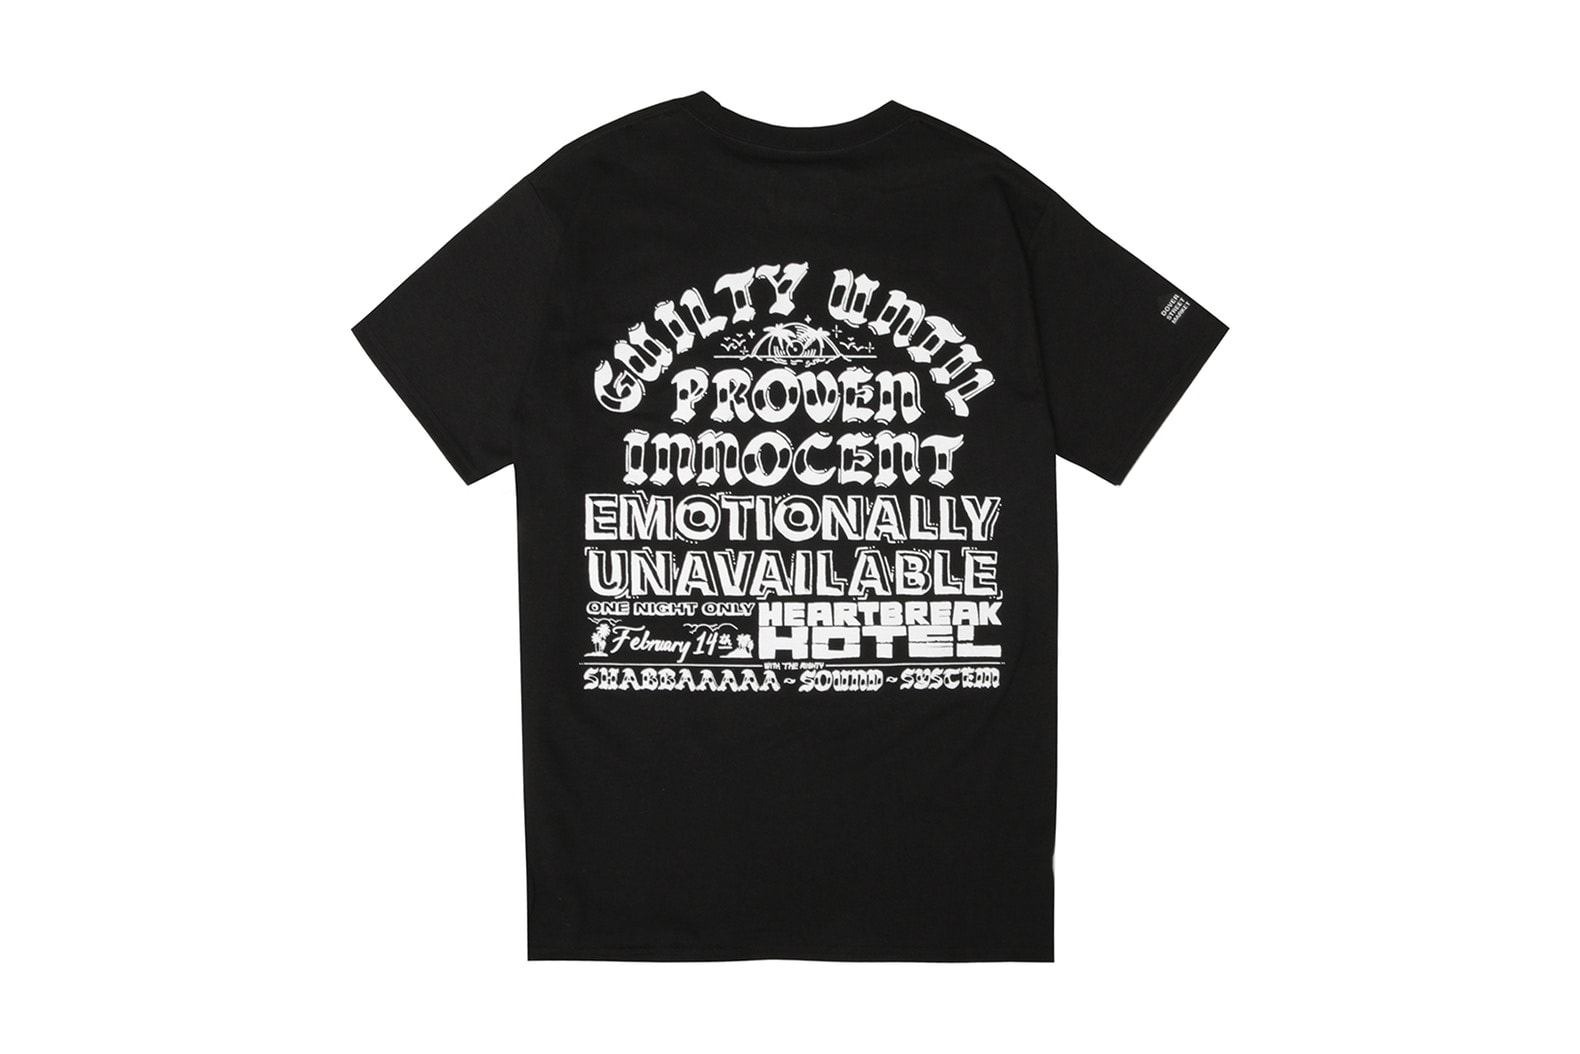 Emotionally Unavailable Dover Street Market Exclusive Collection